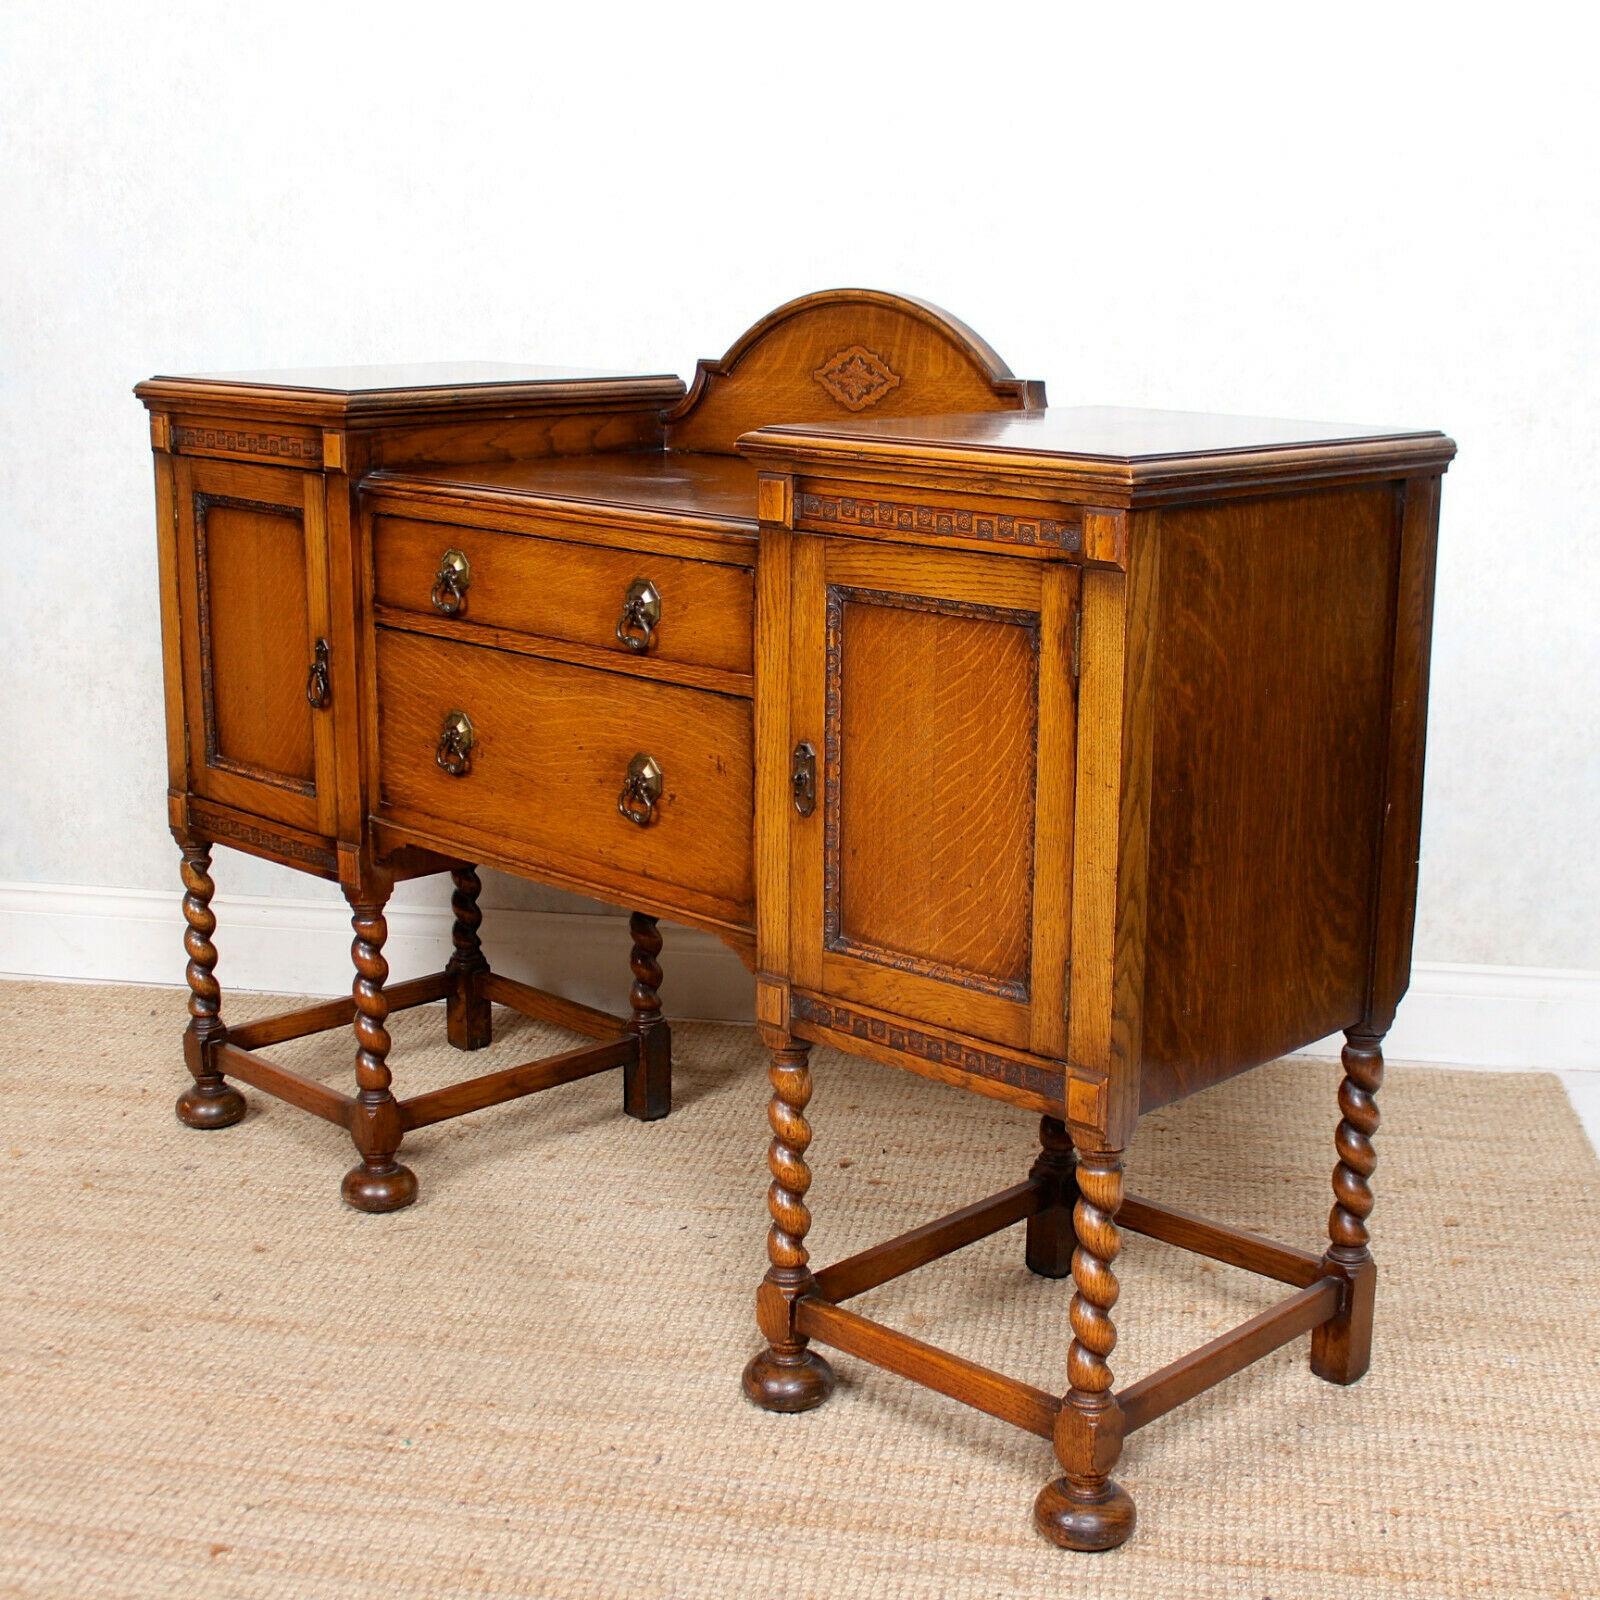 20th Century English Oak Sideboard Carved Barley Twist Credenza Country Arts & Crafts For Sale